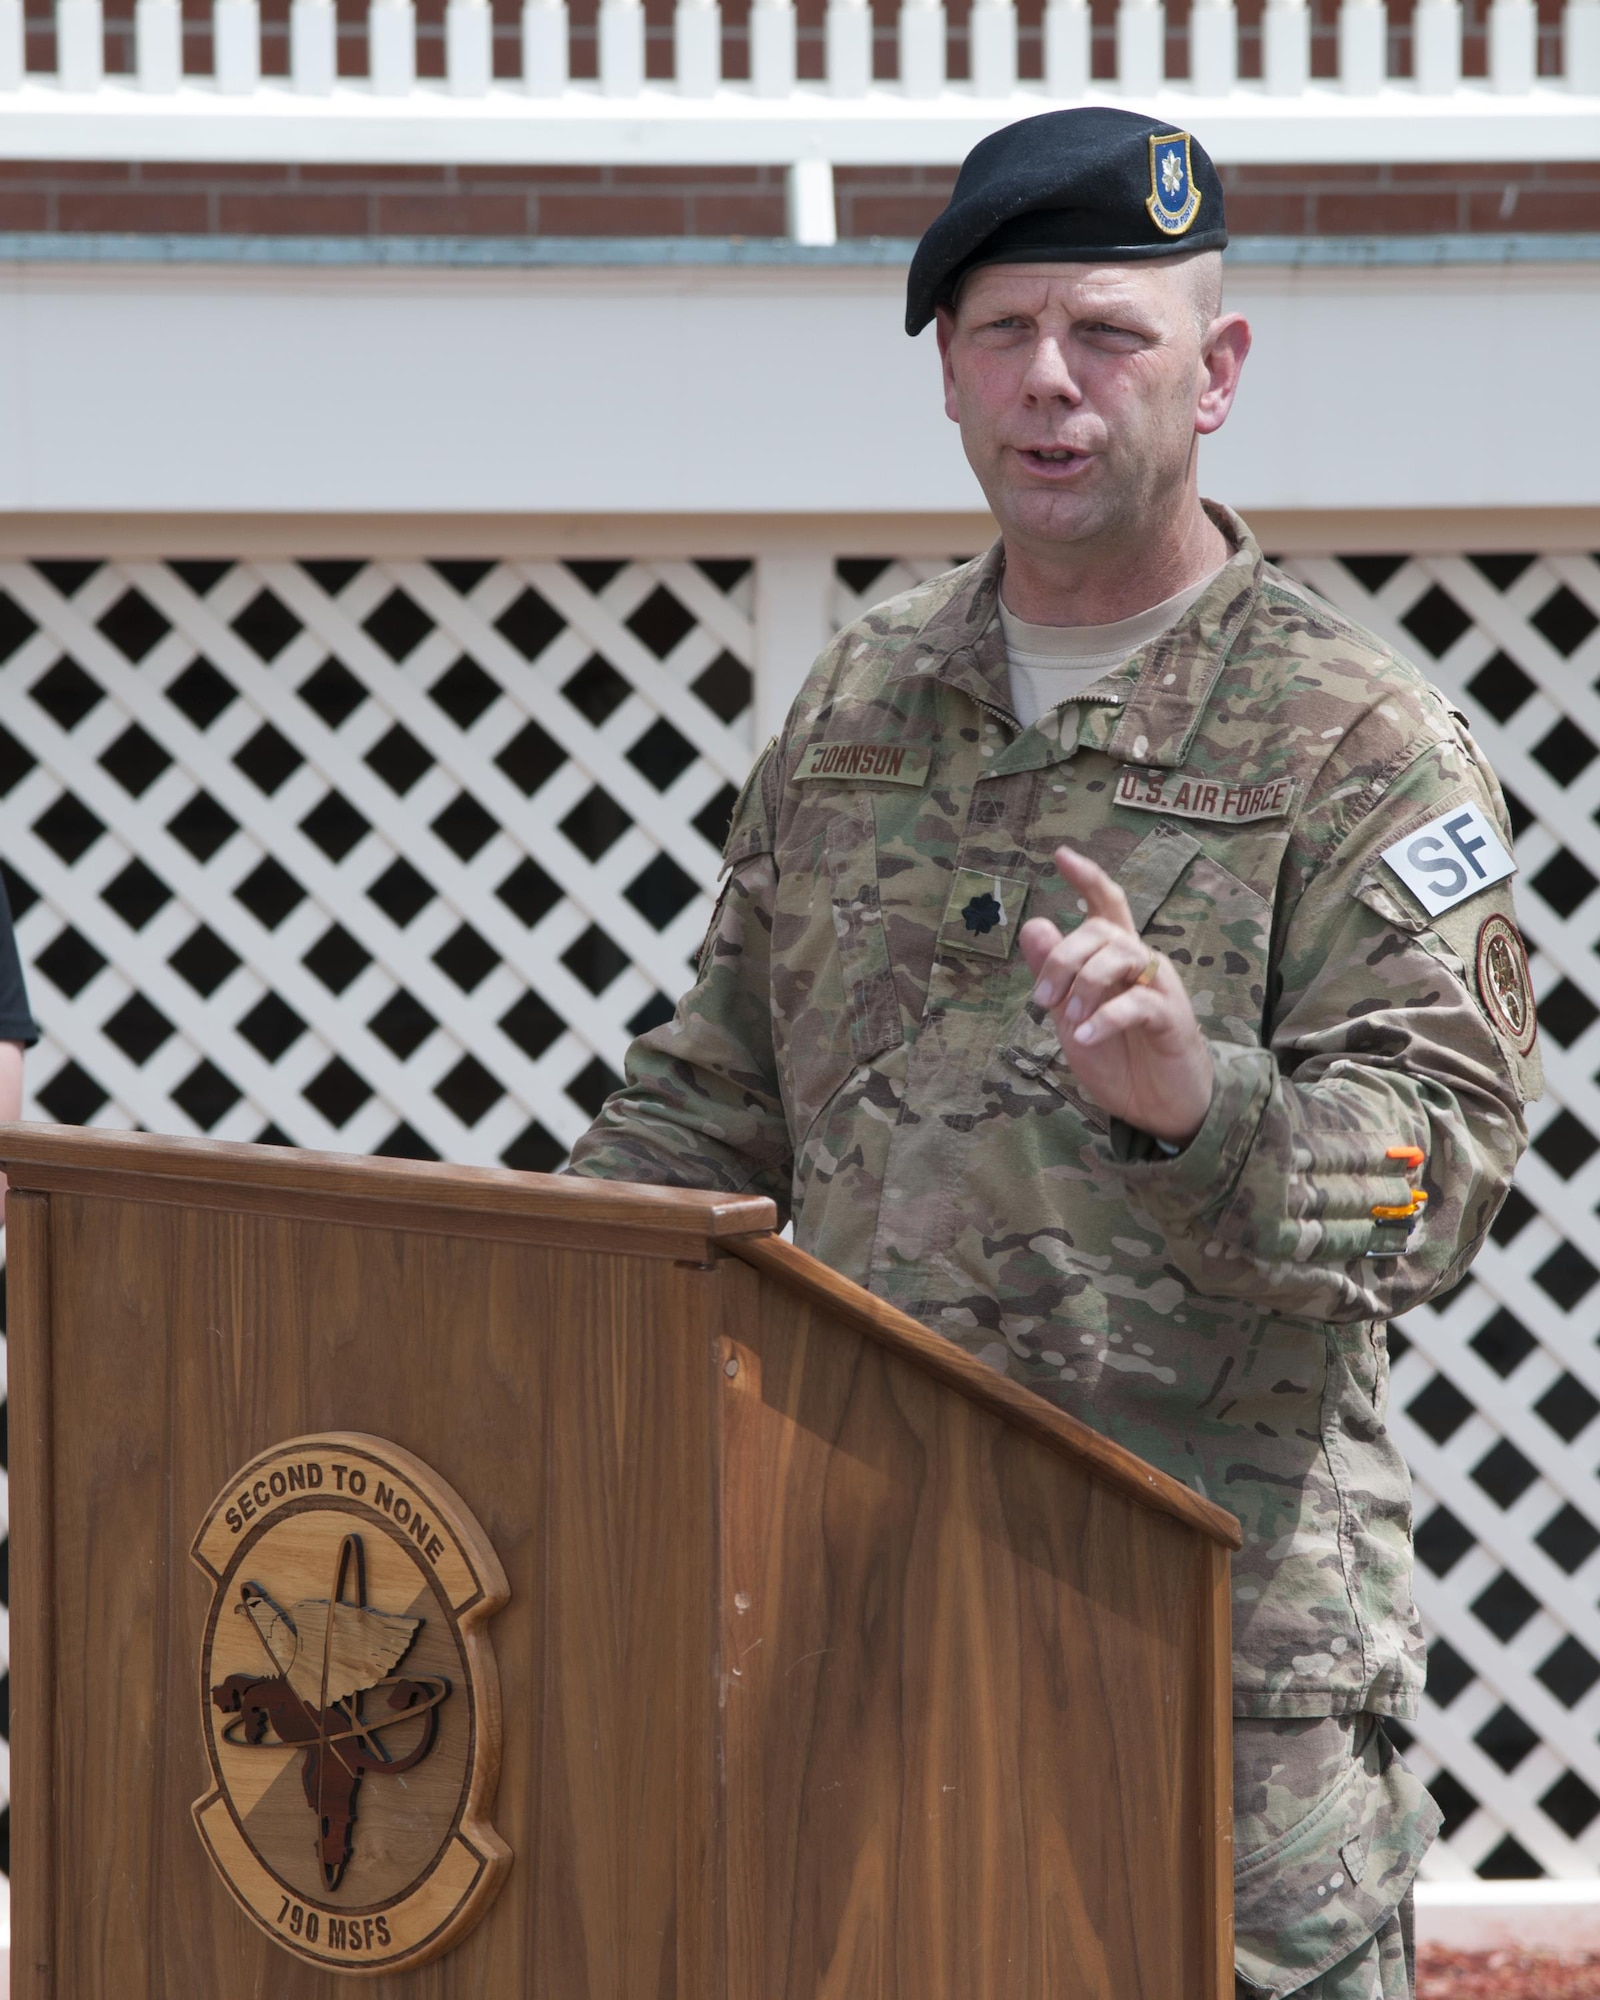 Lt. Col. Christopher Johnson, 790th Missile Security Forces Squadron commander, speaks at a rededication ceremony for a memorial to fallen defenders on F.E. Warren Air Force Base, Wyo., May 30, 2016. Johnson spoke of the sacrifice of the defenders whose names are on the memorial and the importance of remembering what they did for their country.  (U.S. Air Force photo by Senior Airman Jason Wiese)